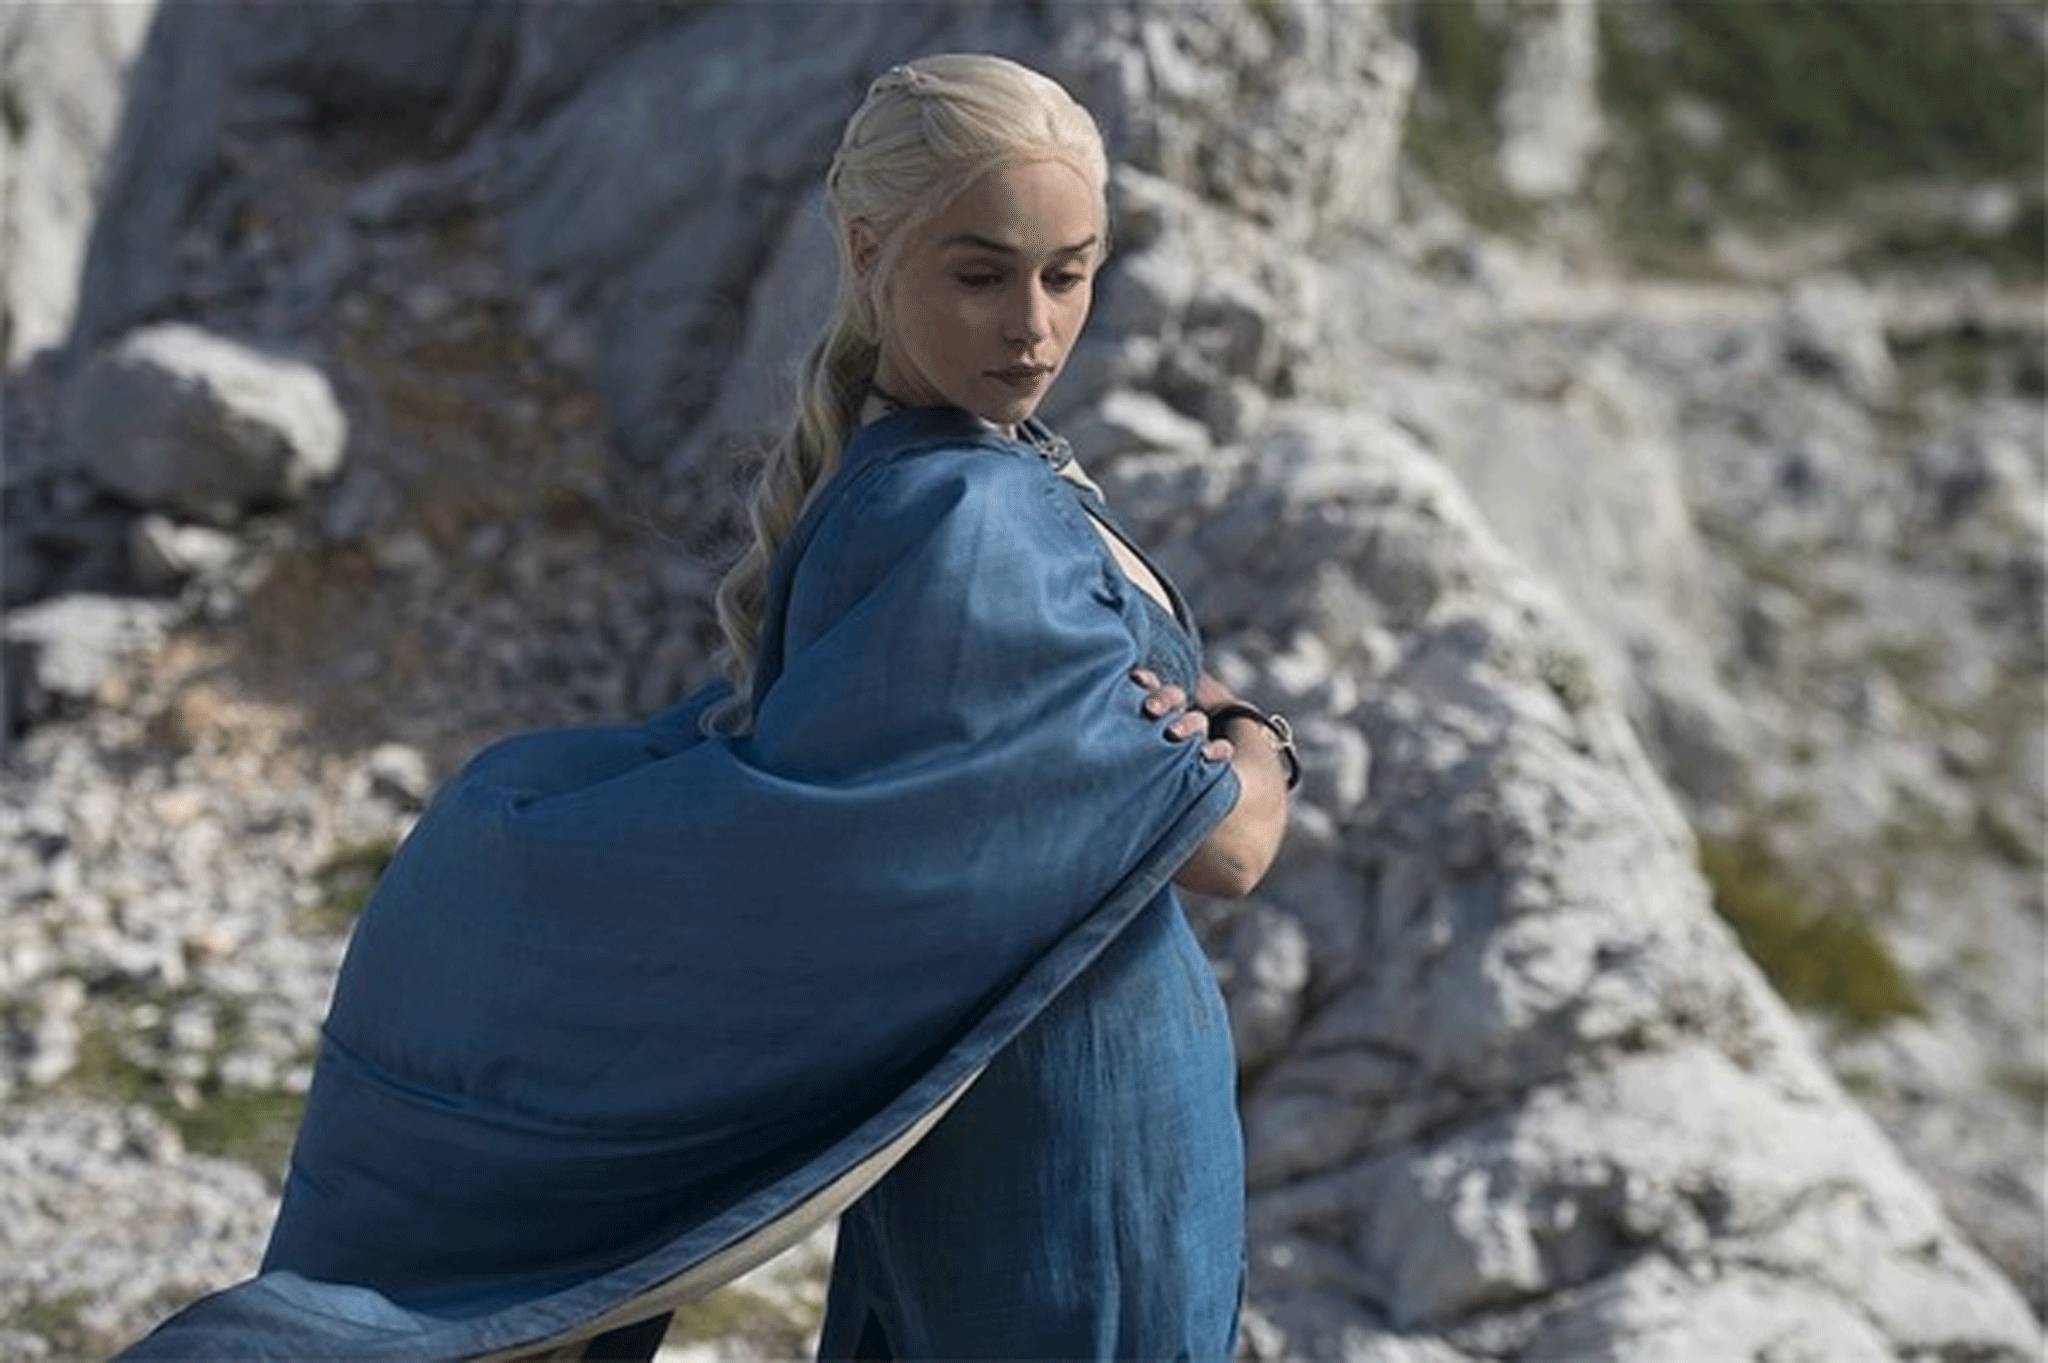 Daenerys Targaryen, the khaleesi played by Emilia Clarke in Game of Thrones – but which MP would be the best dragon-keeper?